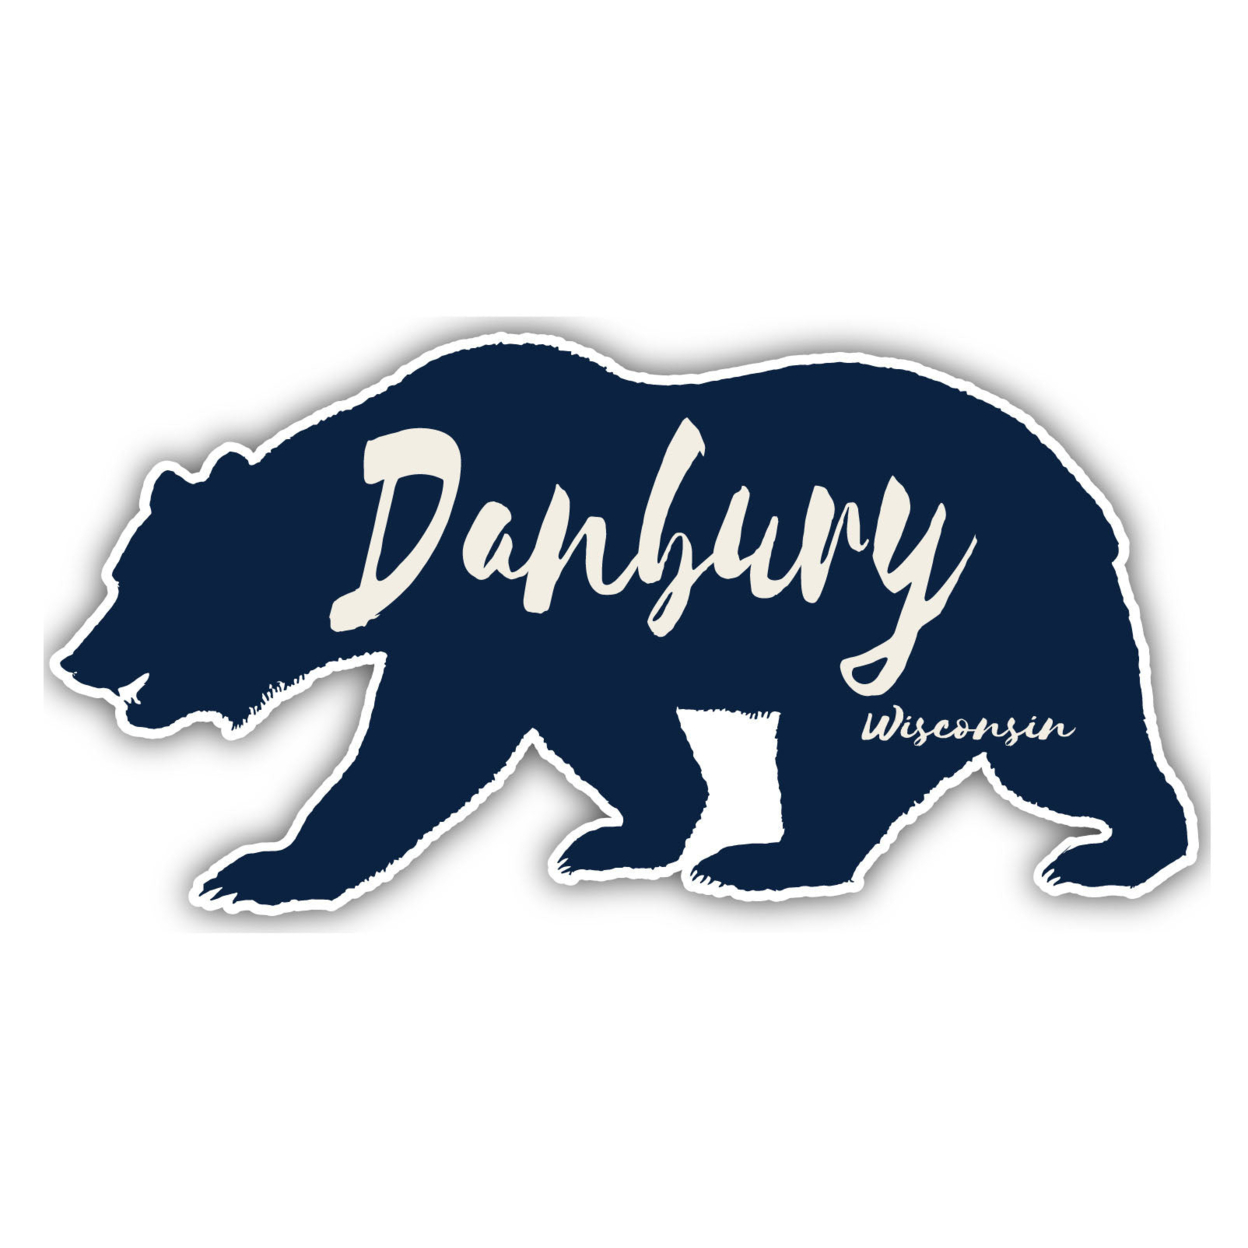 Danbury Wisconsin Souvenir Decorative Stickers (Choose Theme And Size) - Single Unit, 4-Inch, Great Outdoors